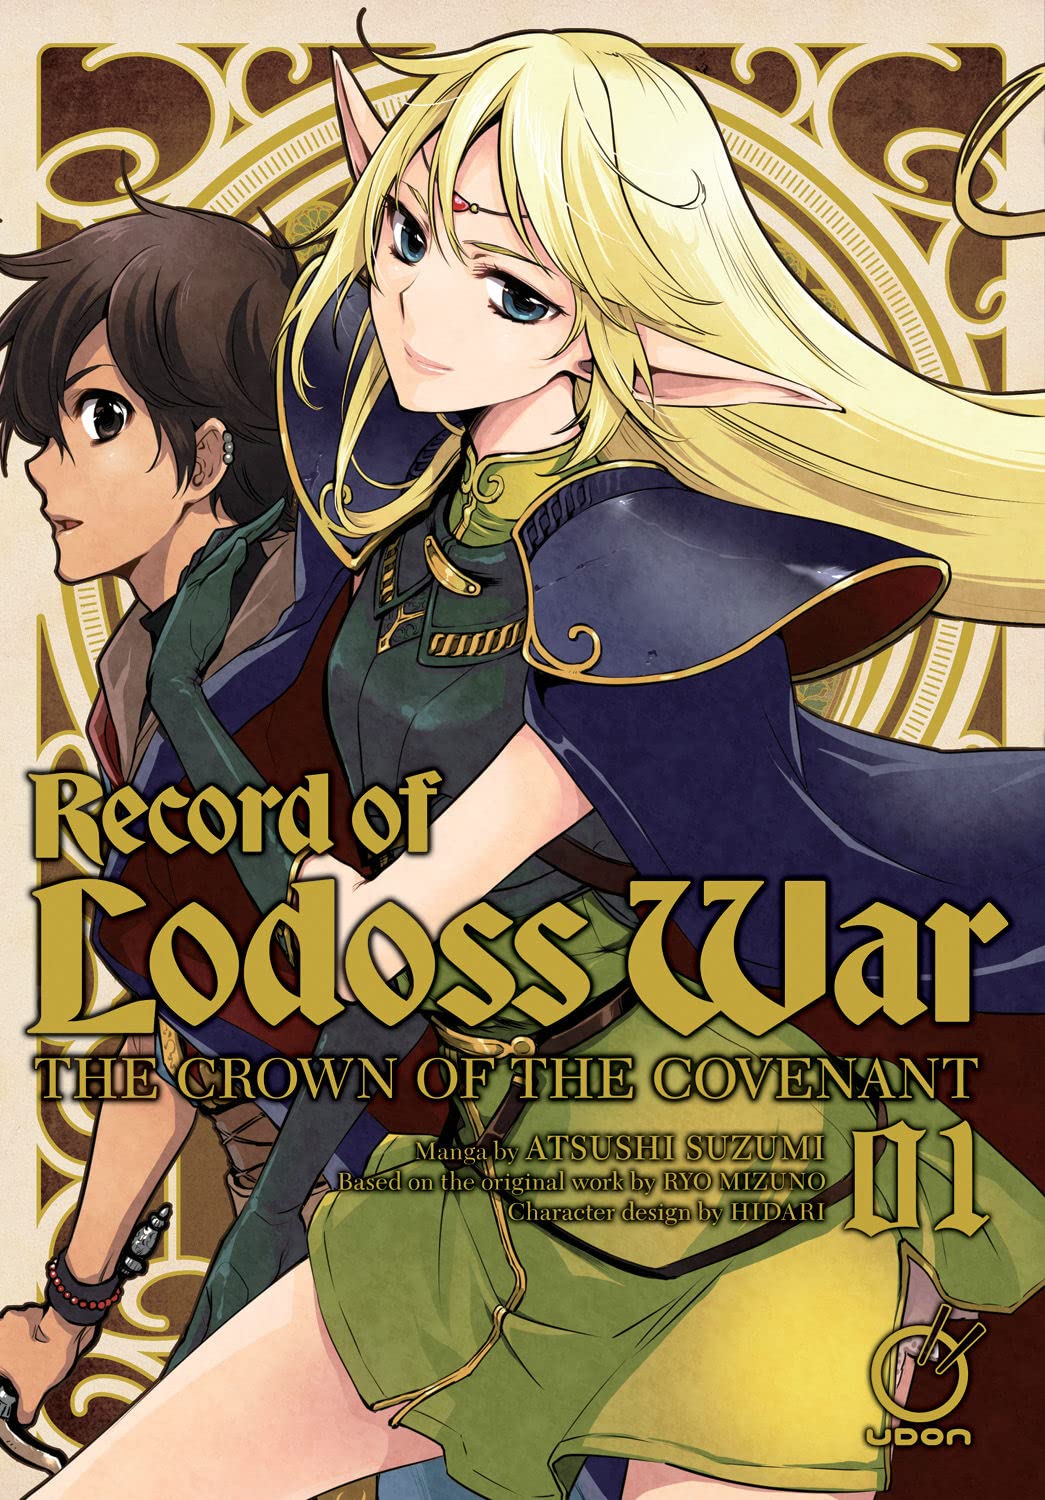 Record of Lodoss War: The Crown of the Covenant Vol. 01